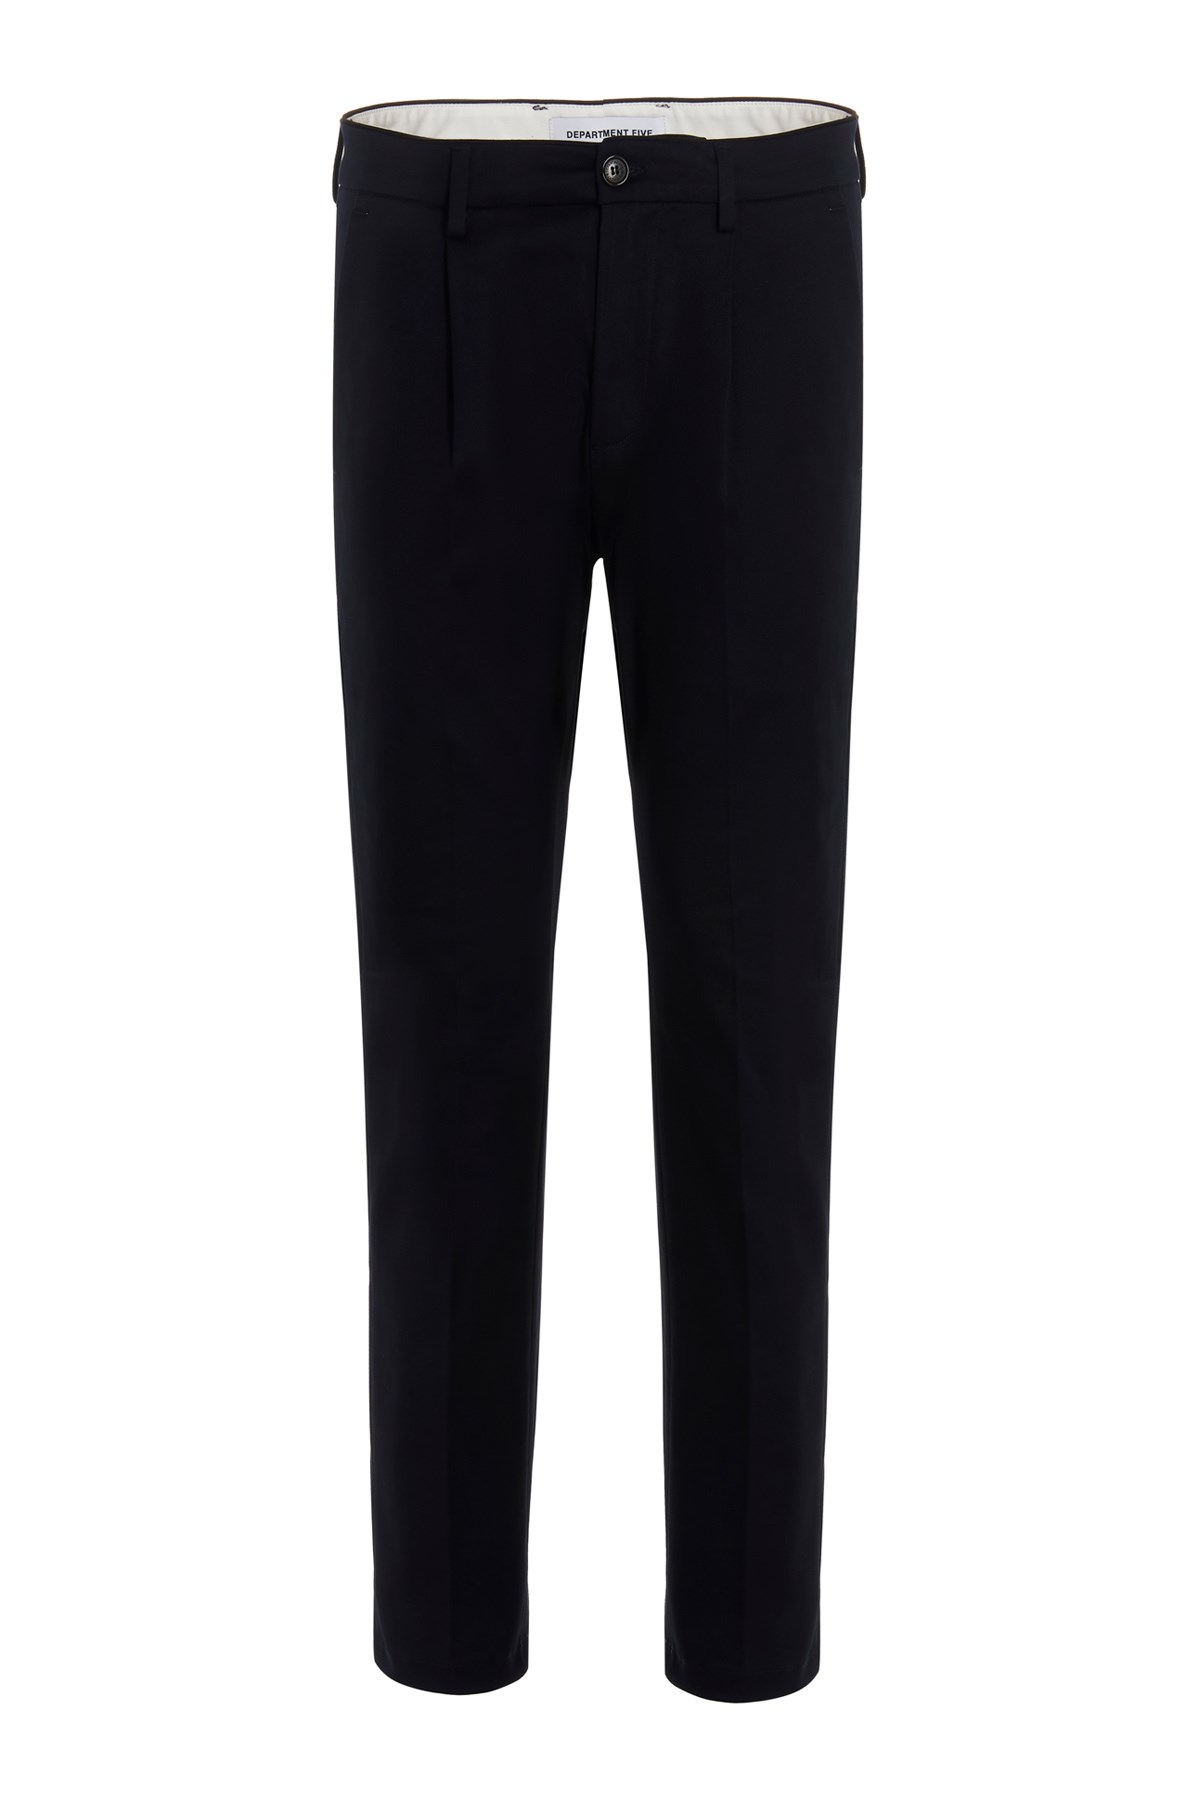 DEPARTMENT 5 'Prince Pence’ Trousers